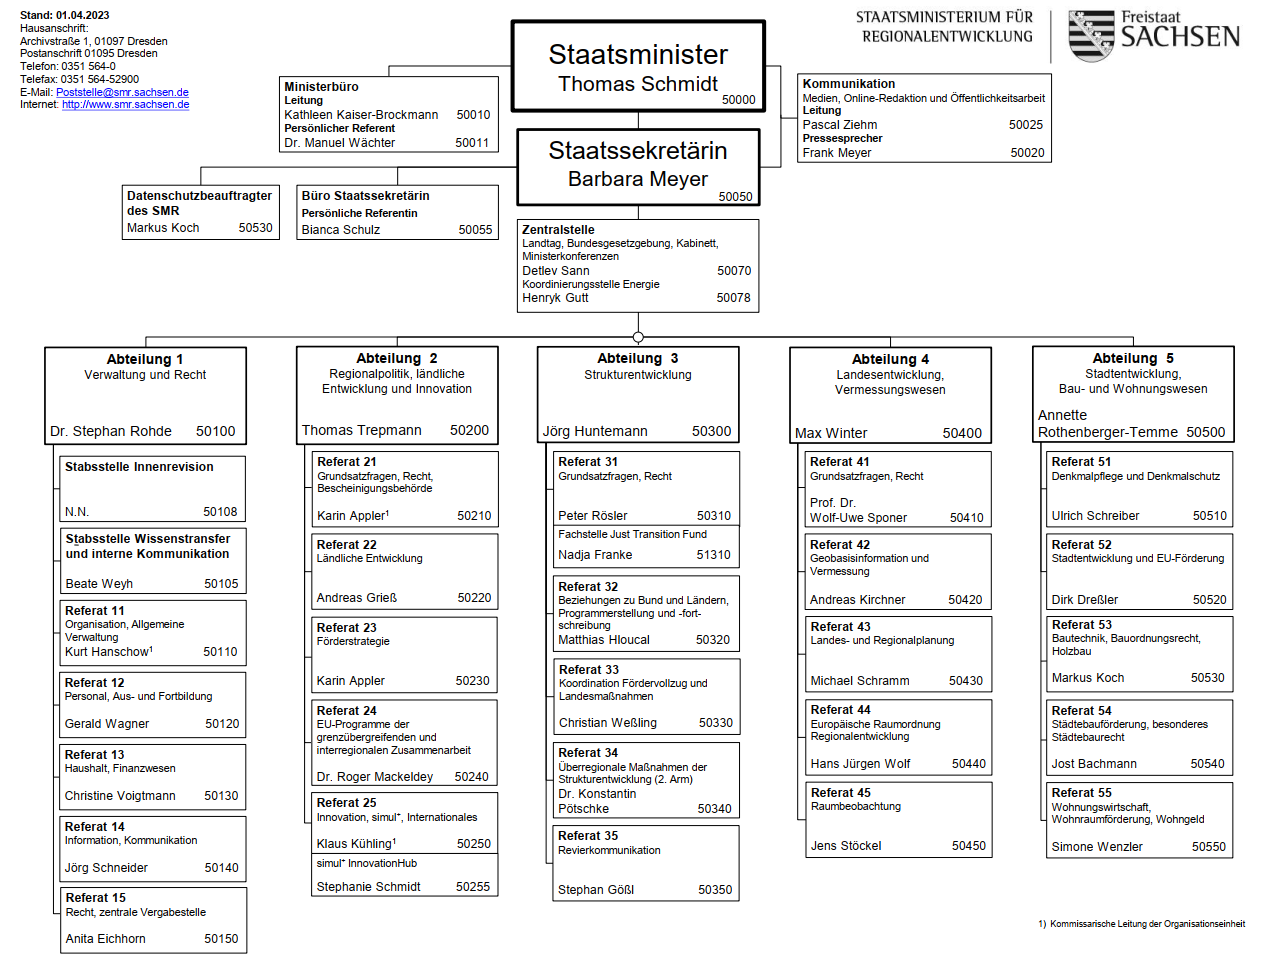 See the Organigramm of the SMR with all its entities and phone number, for barrier free version see PDF below